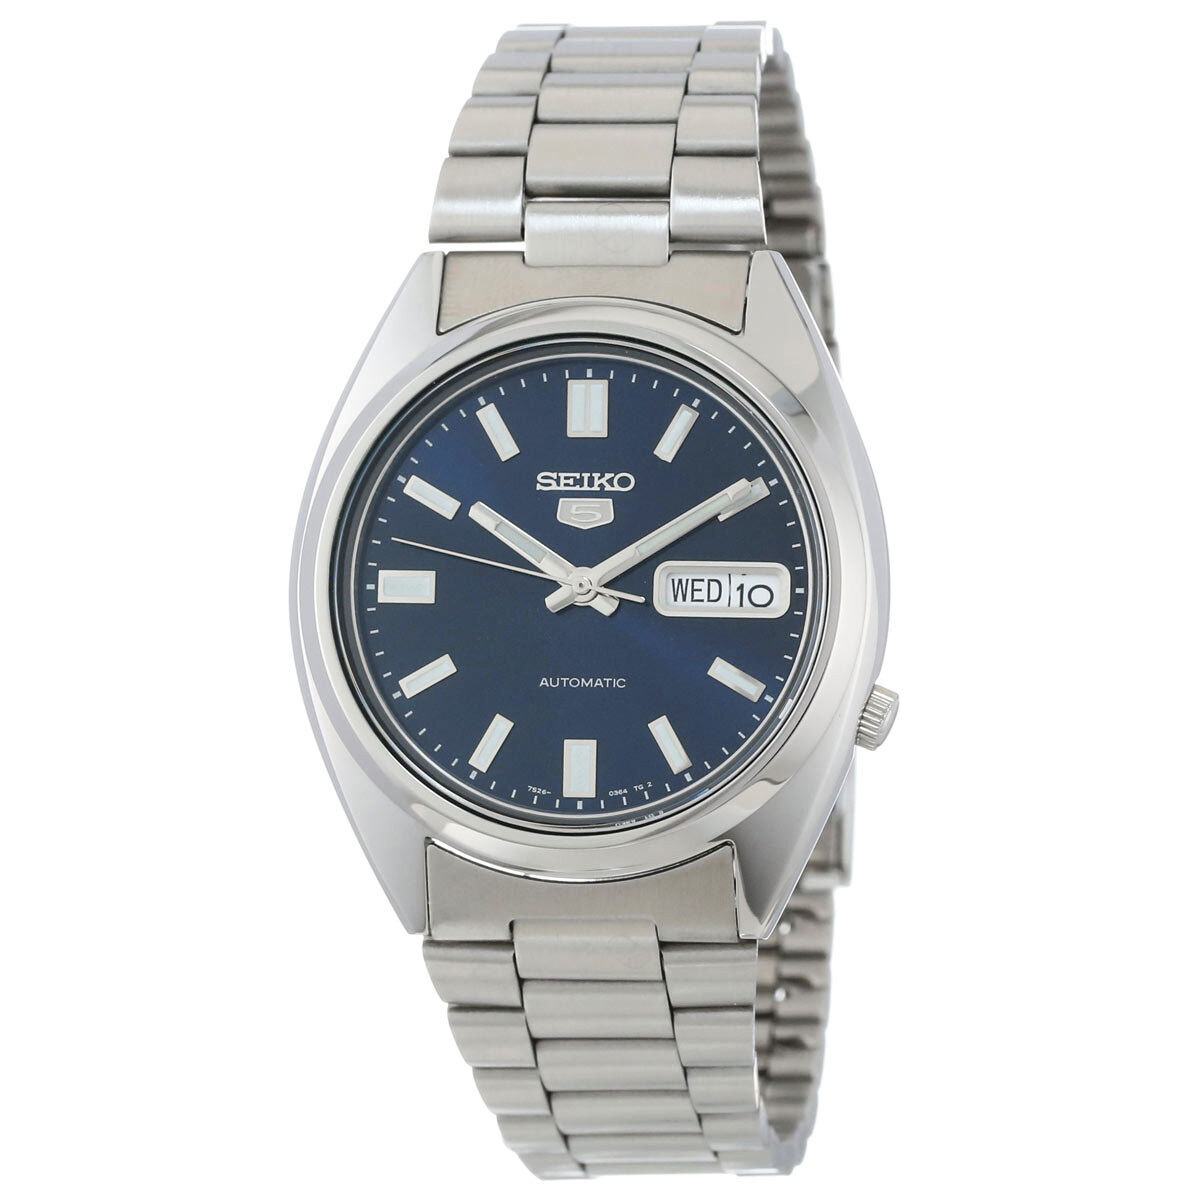 Seiko 5 SNXS77 Automatic Day-Date Blue Dial Stainless Steel Men's Watch SNXS77K1